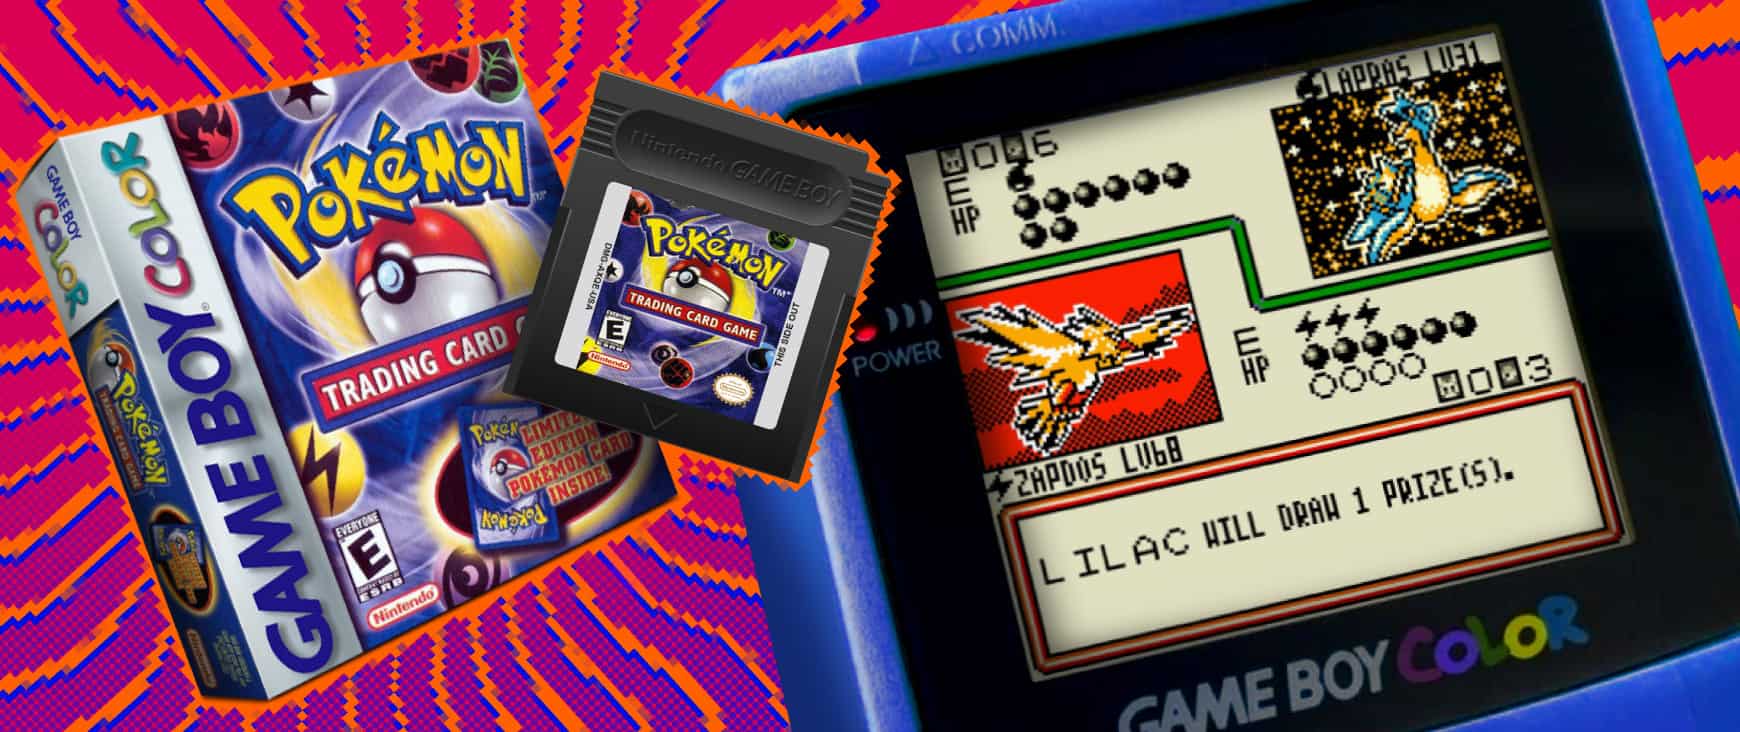 Pokémon Trading Card Game for Game Boy Color